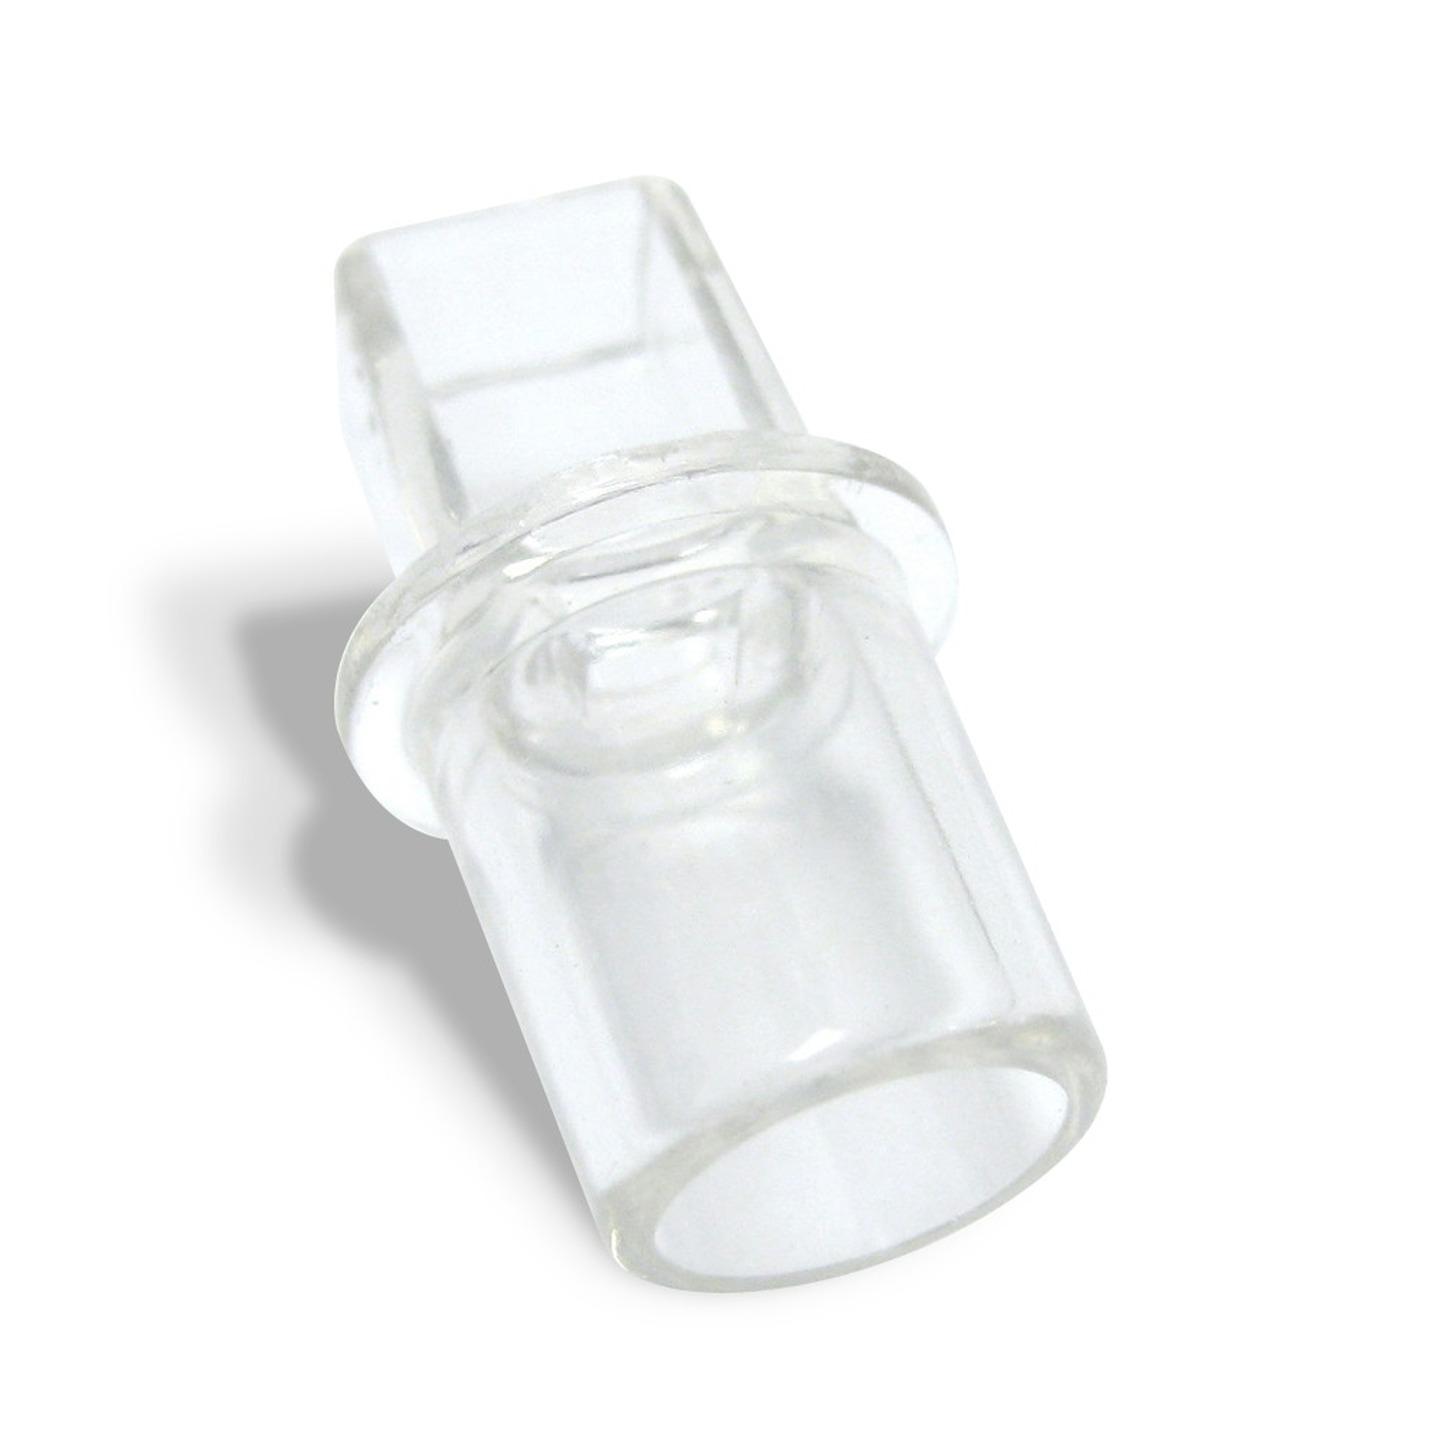 Spare Mouthpieces for Protech QM7320 Breathalyser - Pack of 6